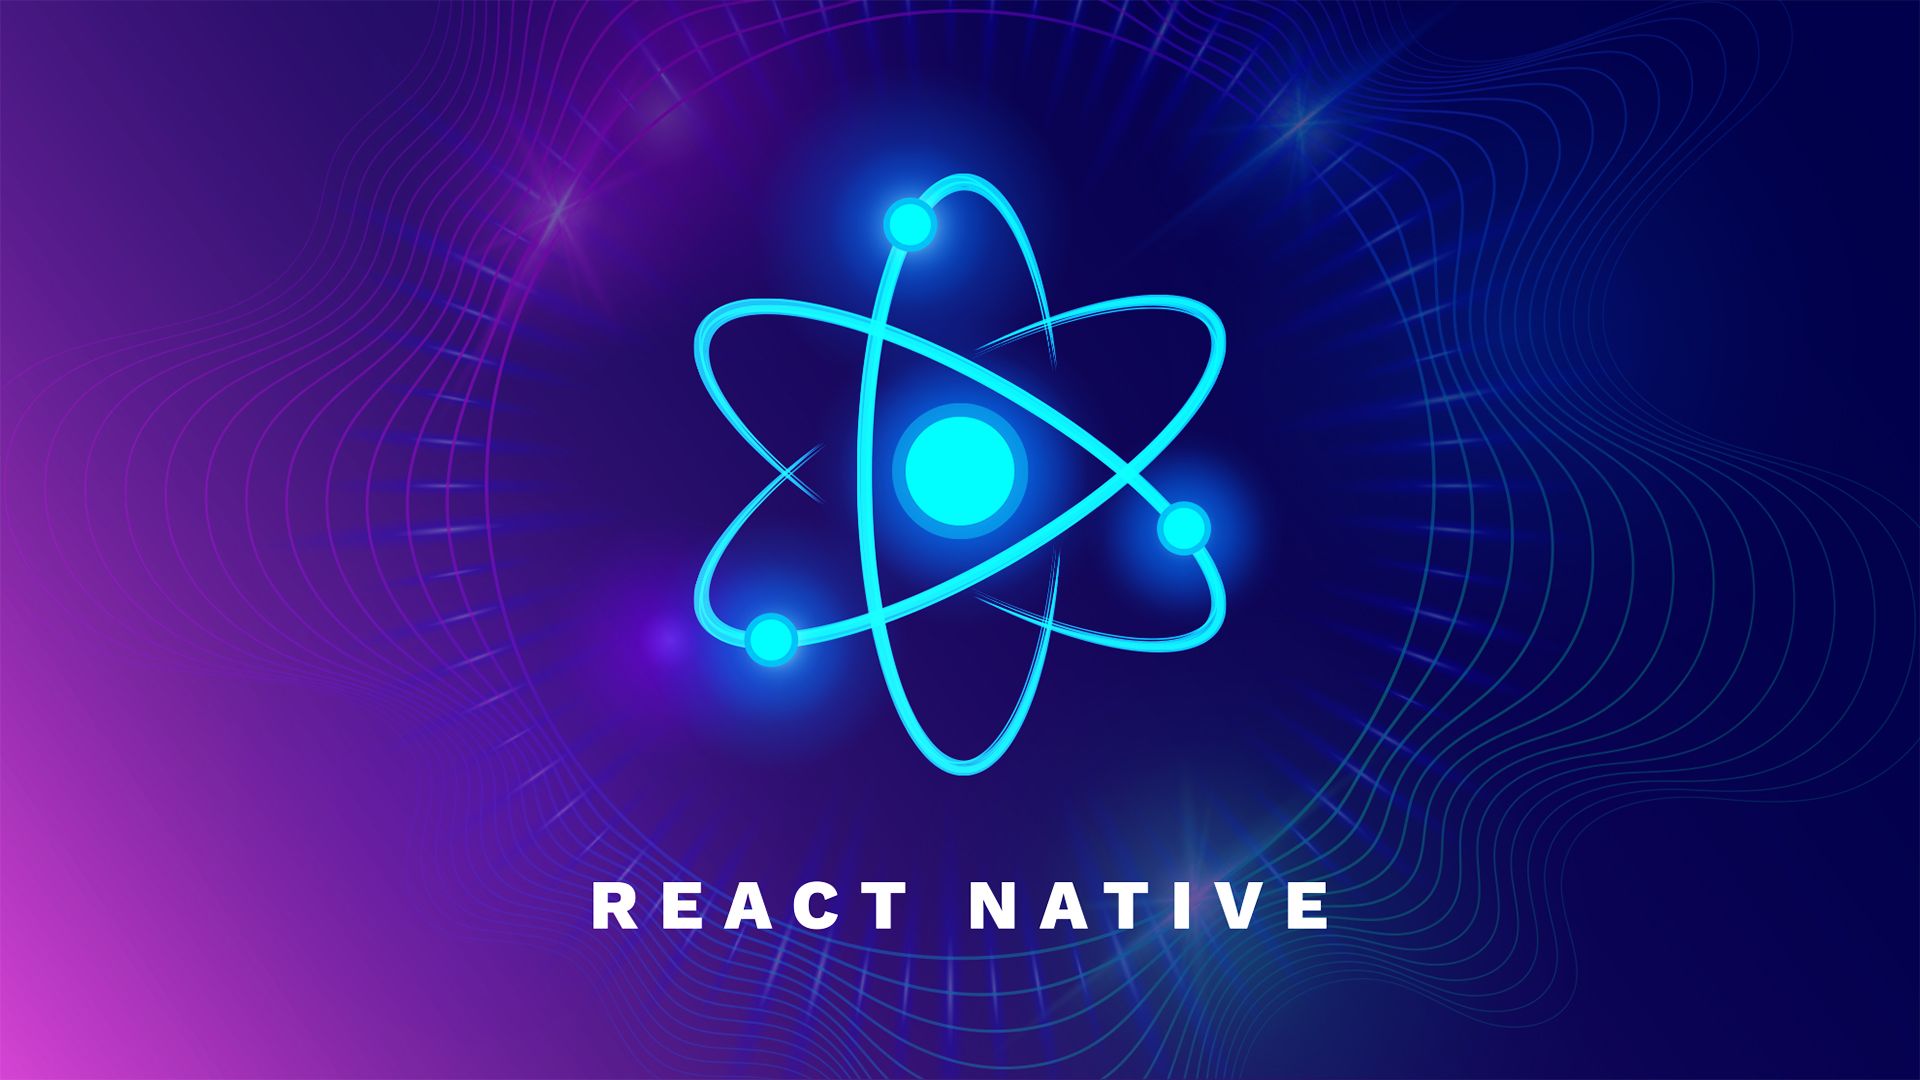 The Ultimate React Native Course. Code with Mosh